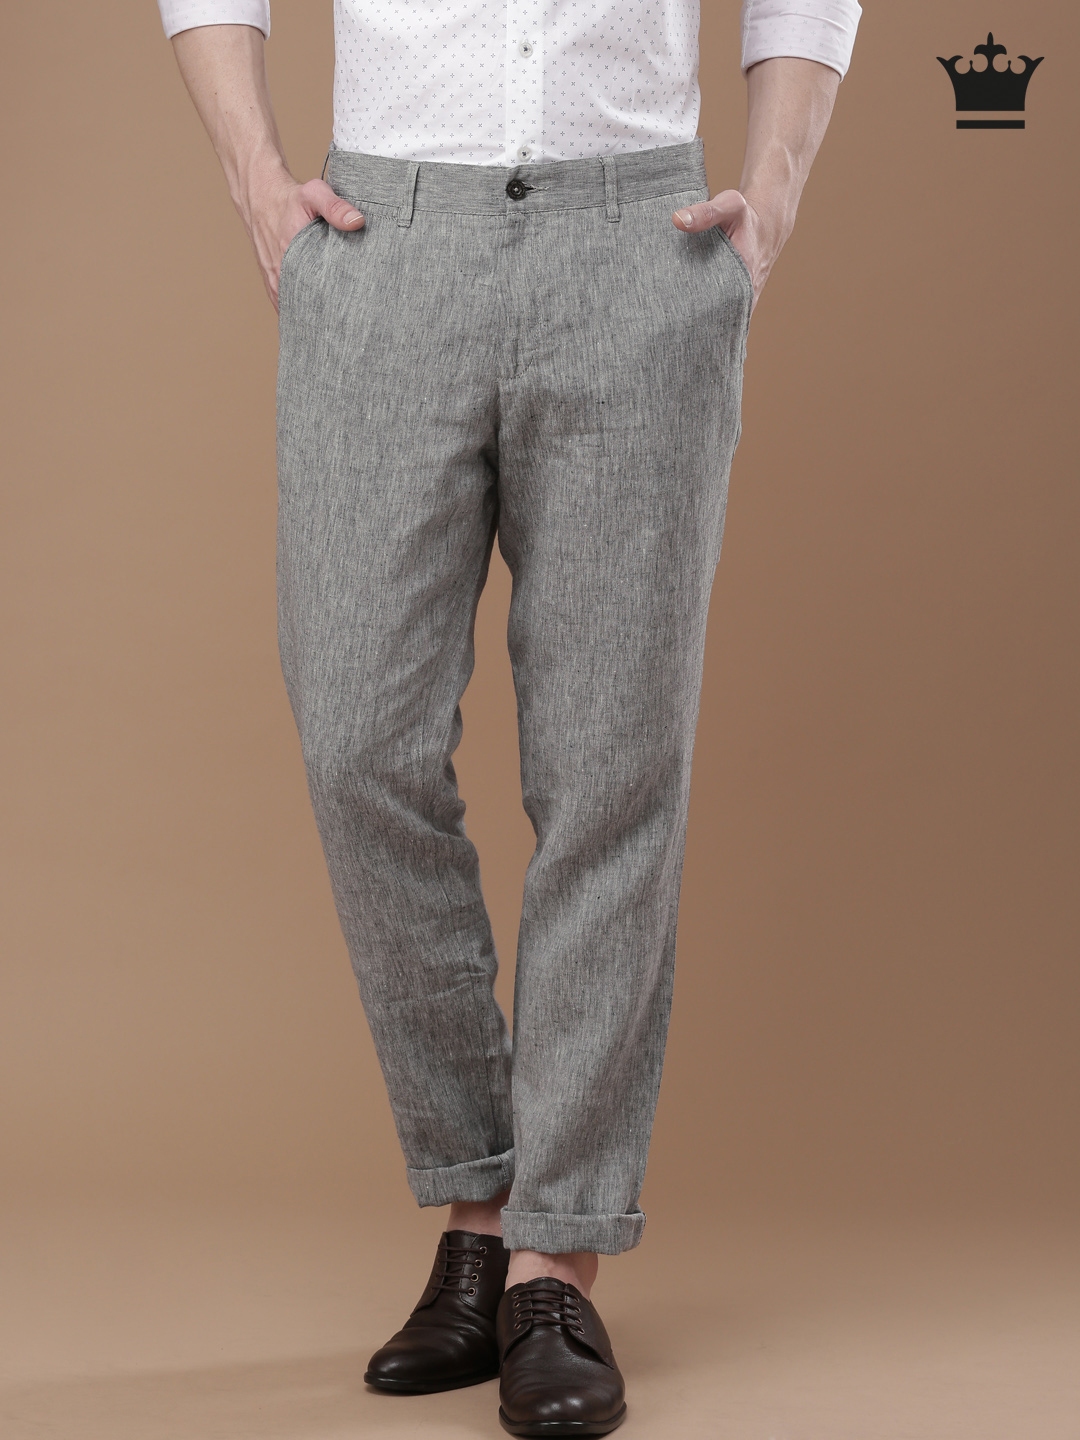 Buy Brown Linen Trousers Online at Jayporecom